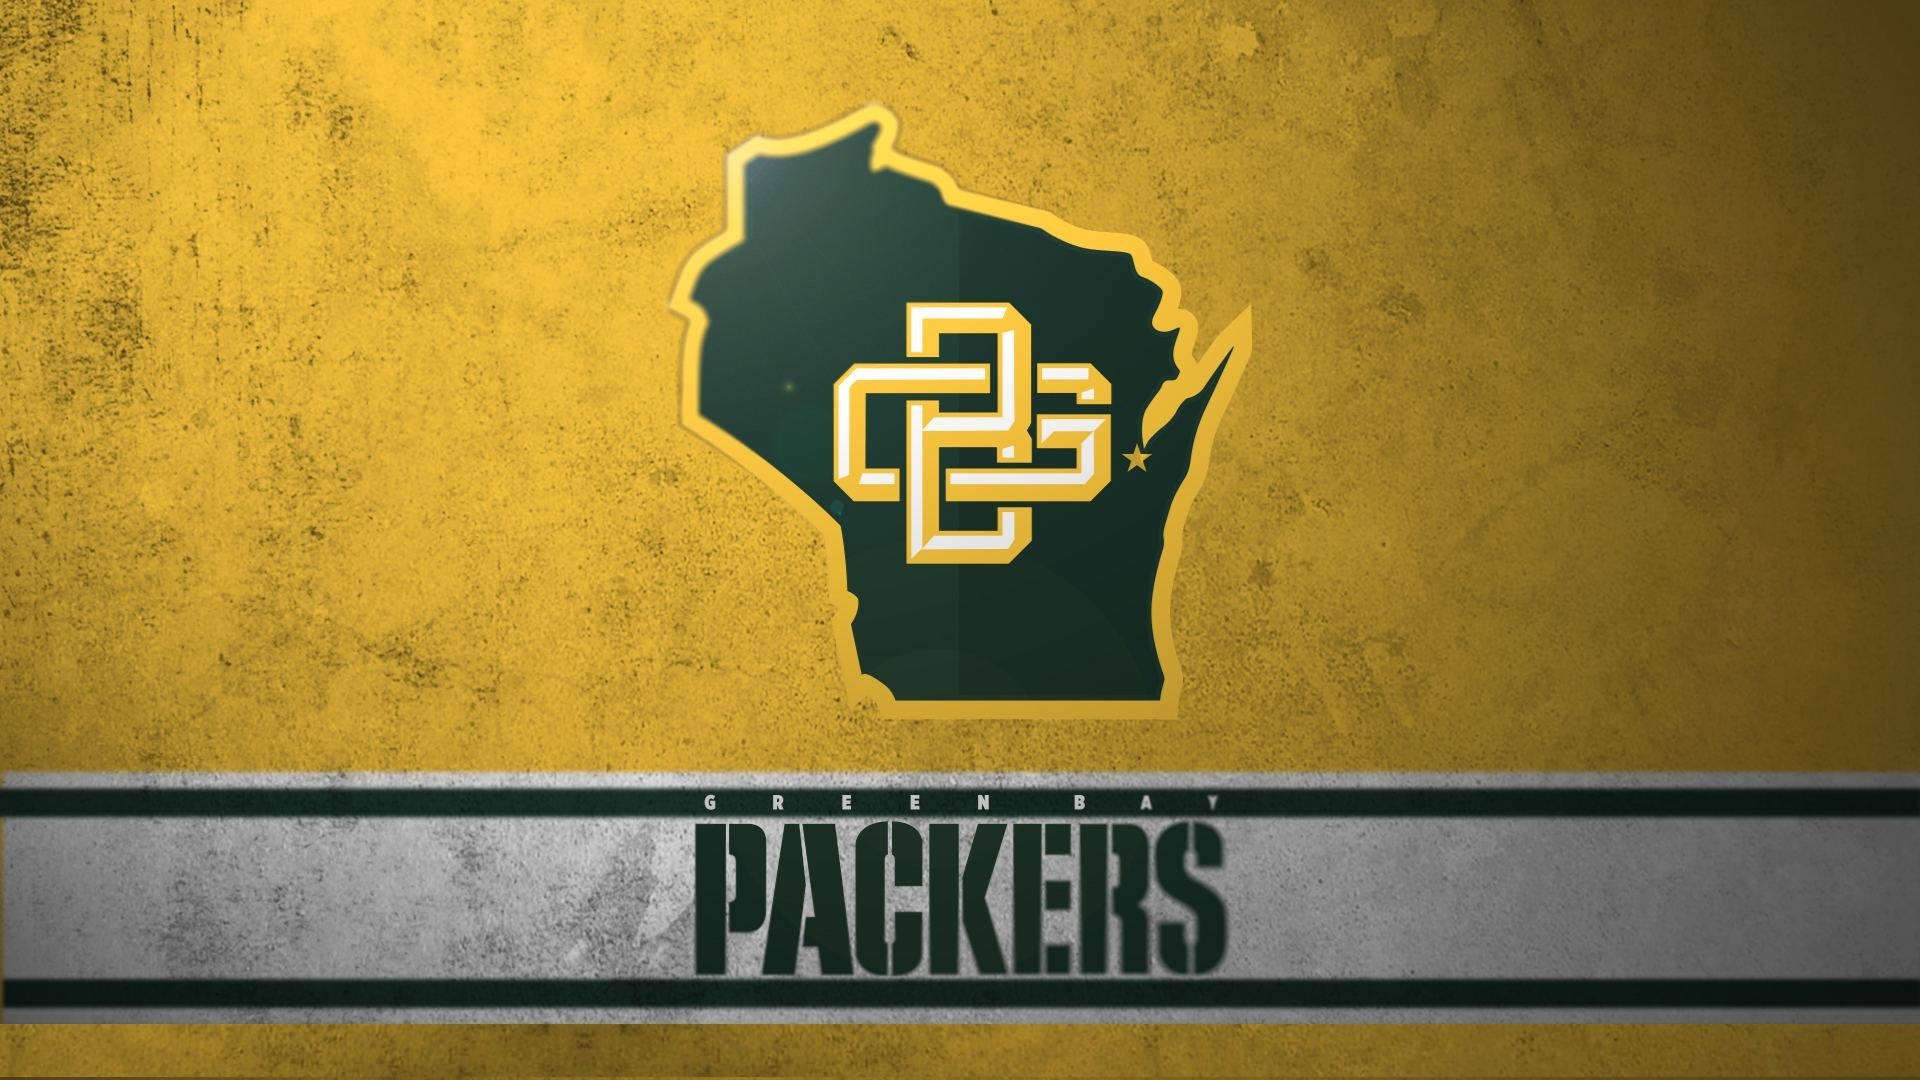 HD Green Bay Packers Backgrounds With high-resolution 1920X1080 pixel. Download and set as wallpaper for Desktop Computer, Apple iPhone X, XS Max, XR, 8, 7, 6, SE, iPad, Android